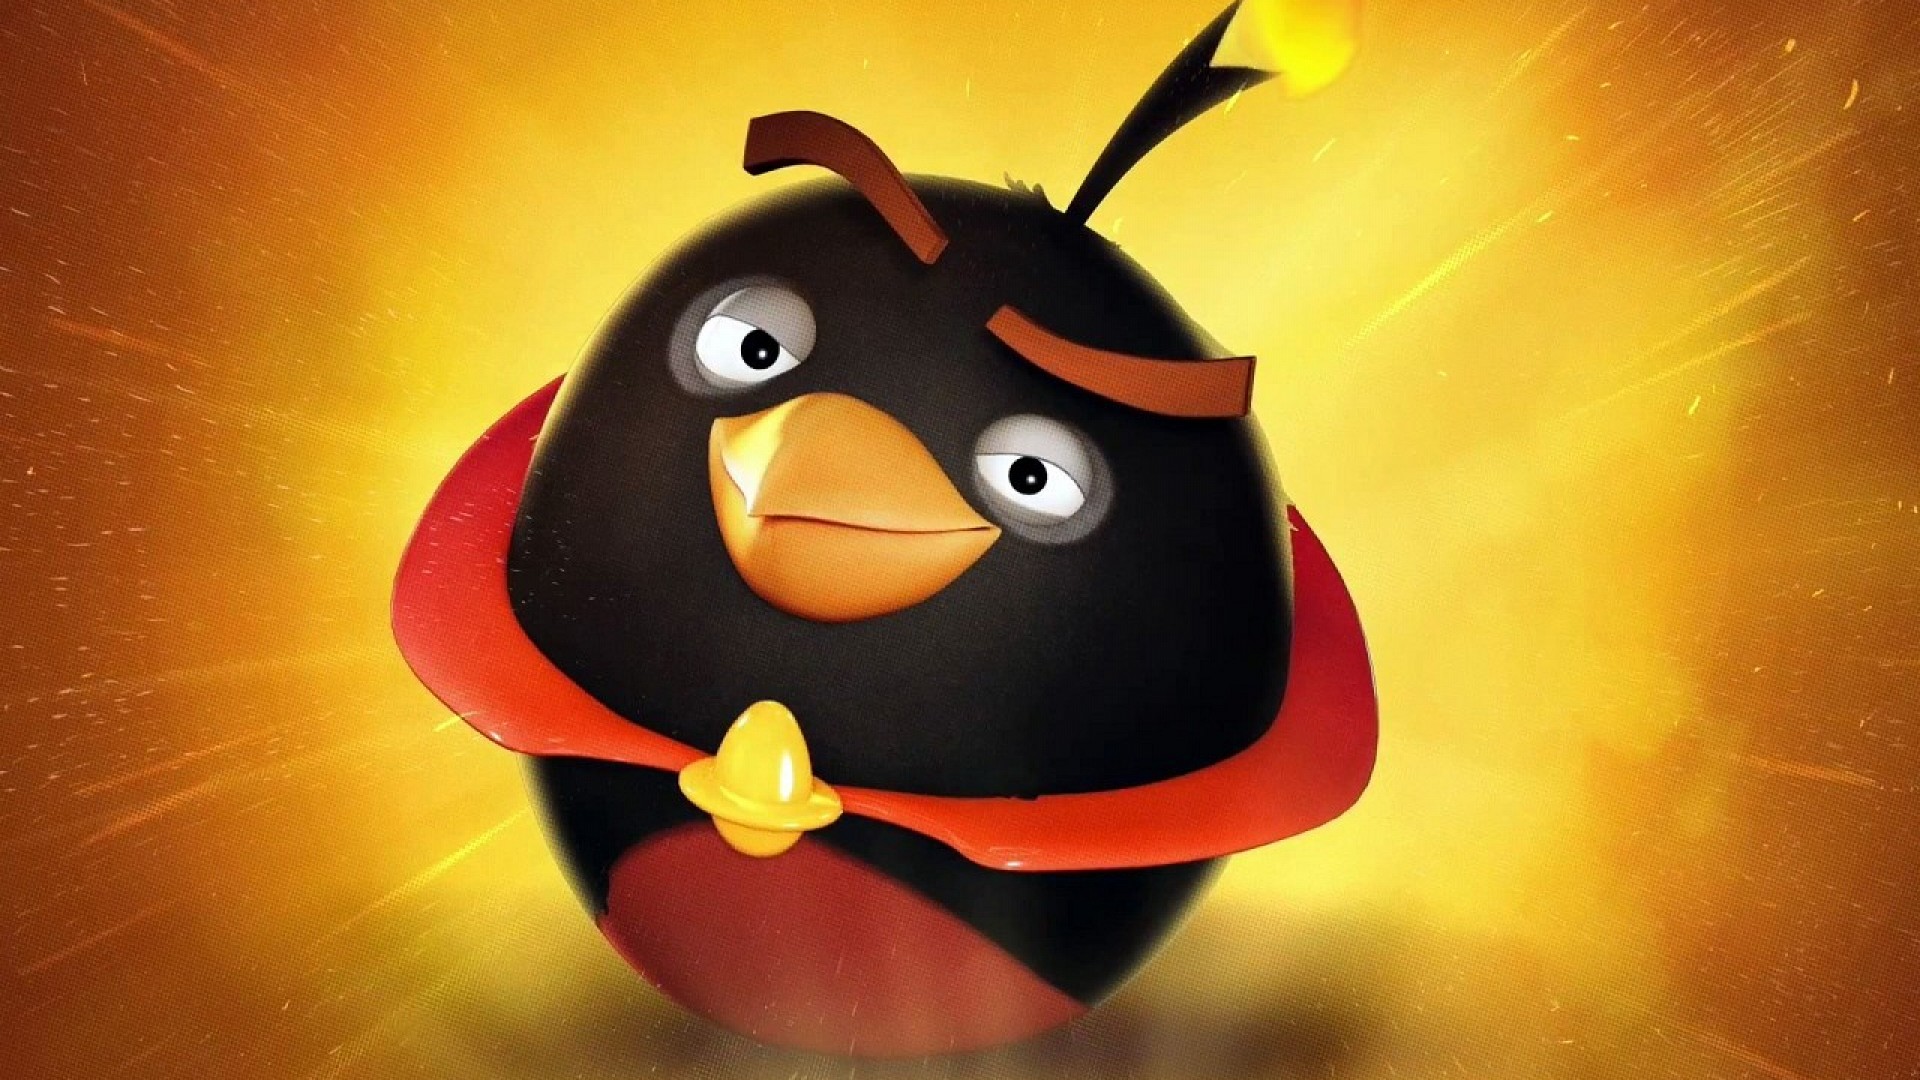 Play Angry Birds Online Black Angry Birds Wallpaper Download